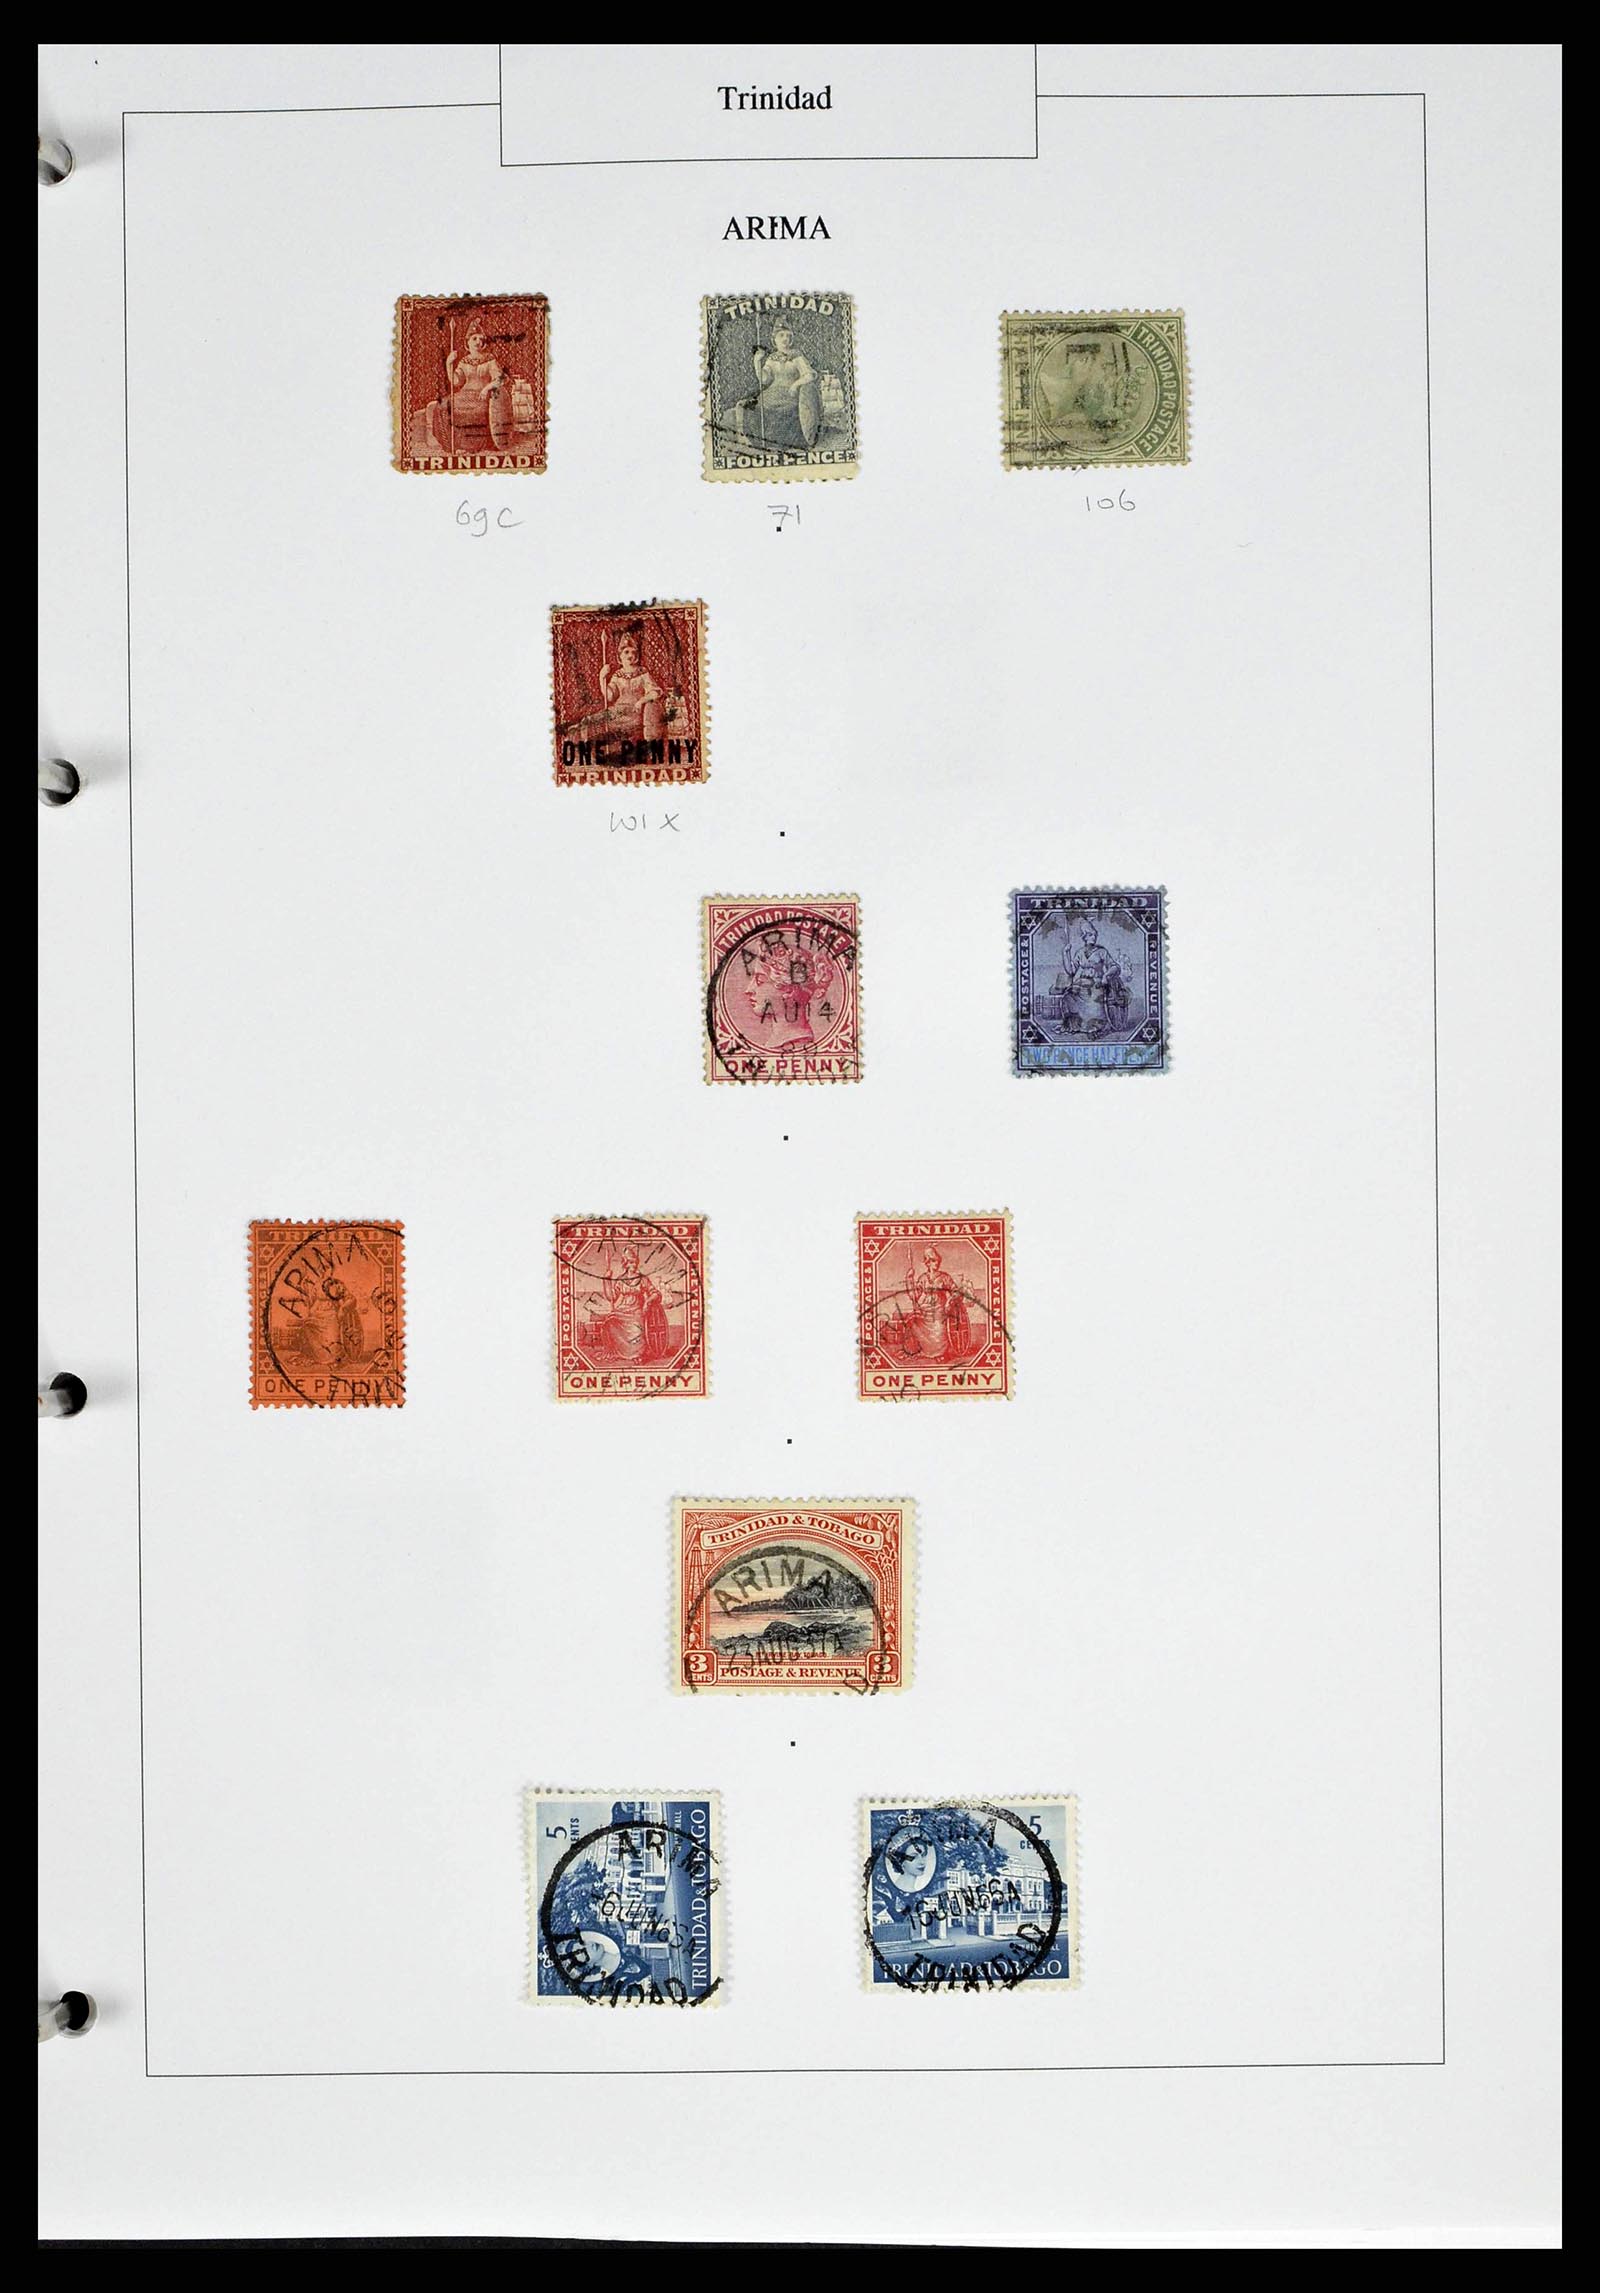 38481 0015 - Stamp collection 38481 Trinidad and Tobago cancels 1859-1960.